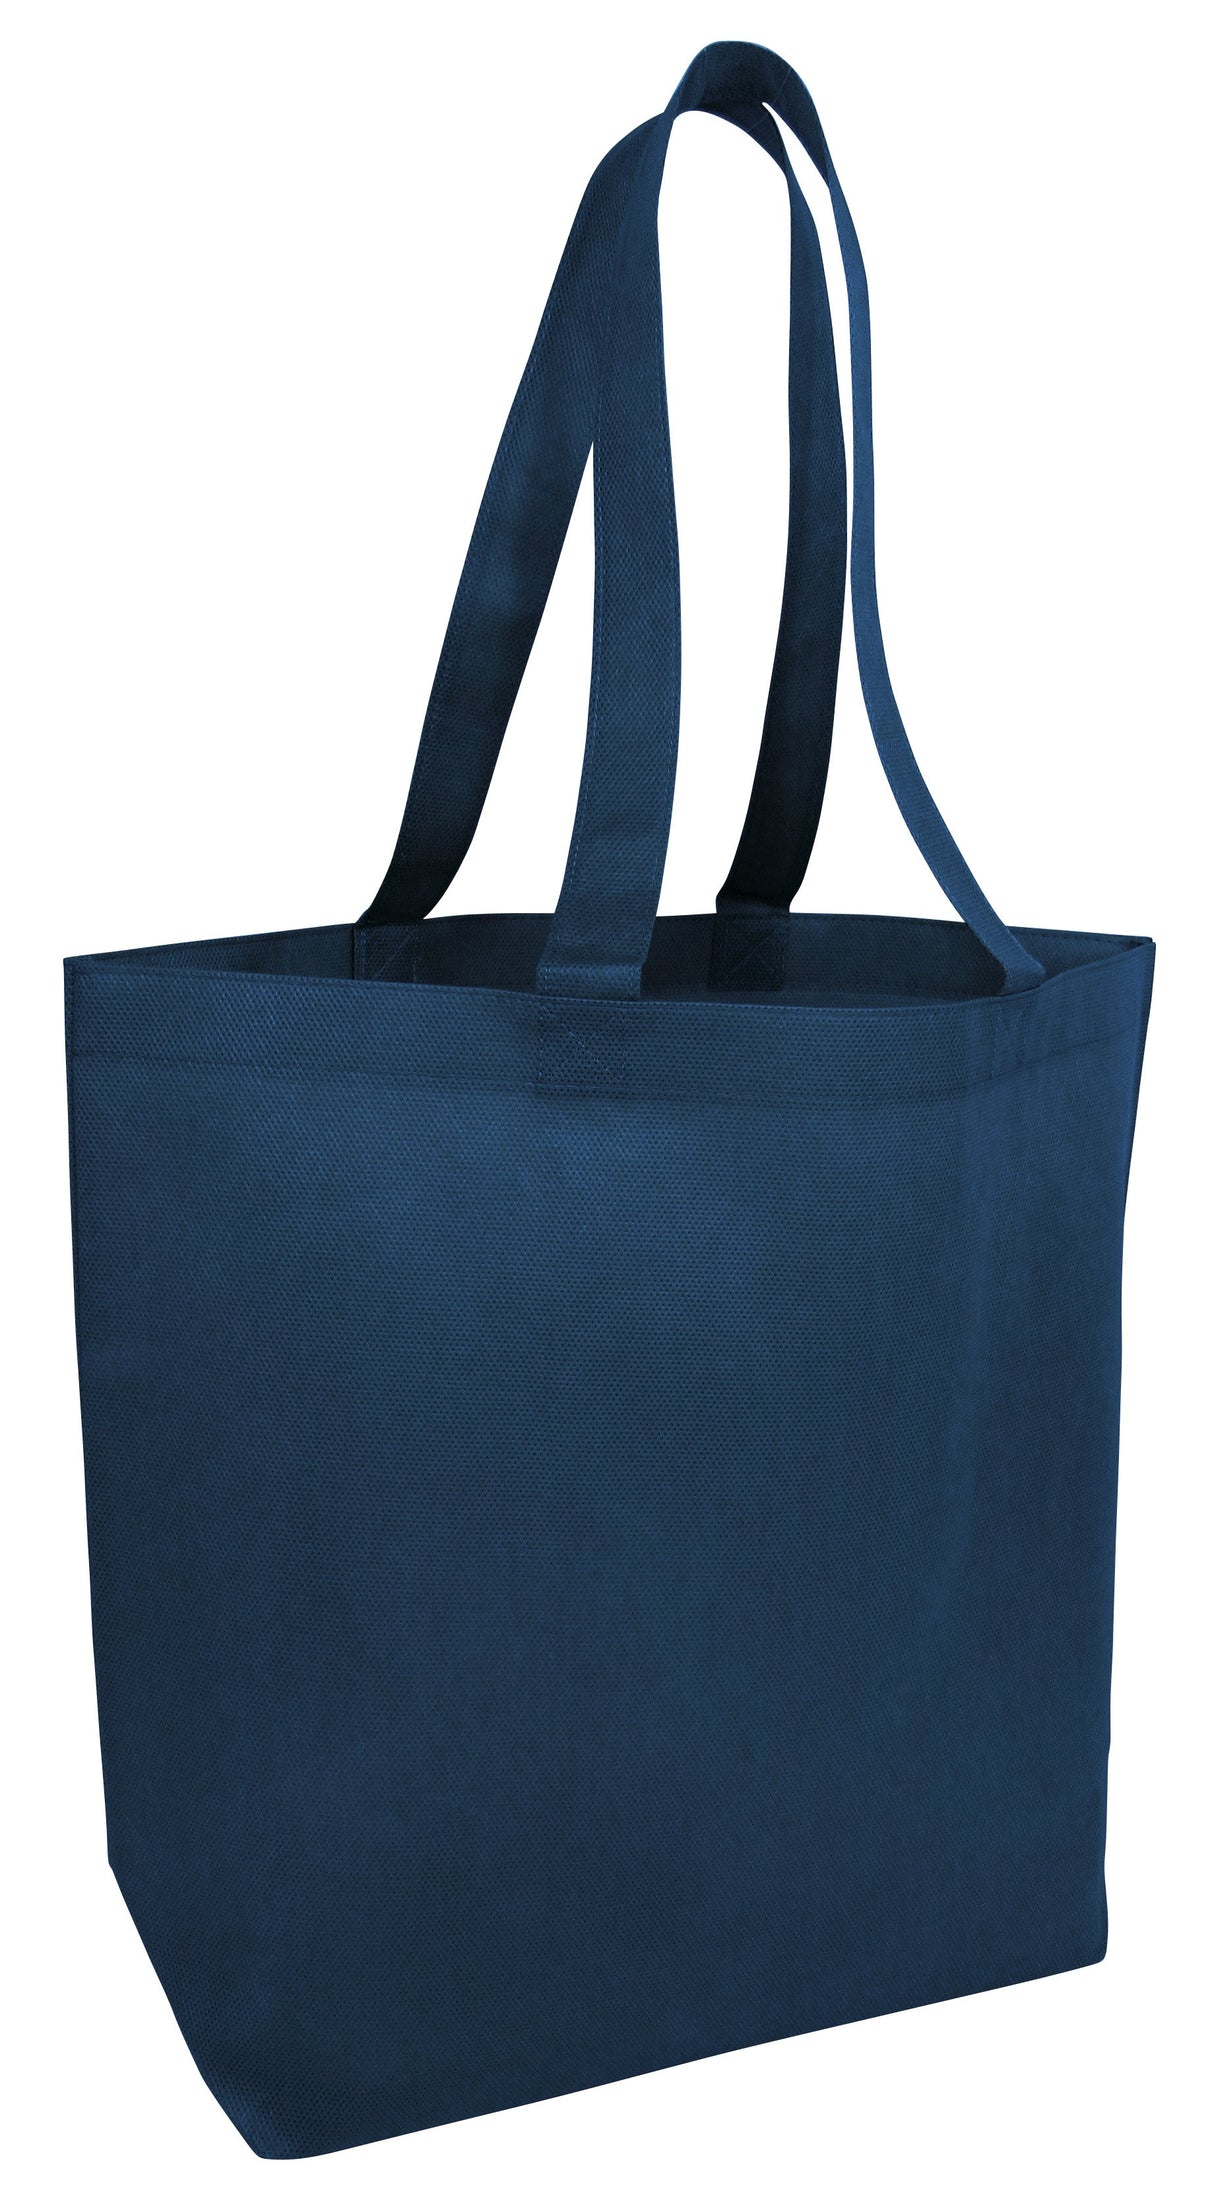 50 ct Economical Promotional Large Tote Bags with Bottom Gusset - Pack of 50